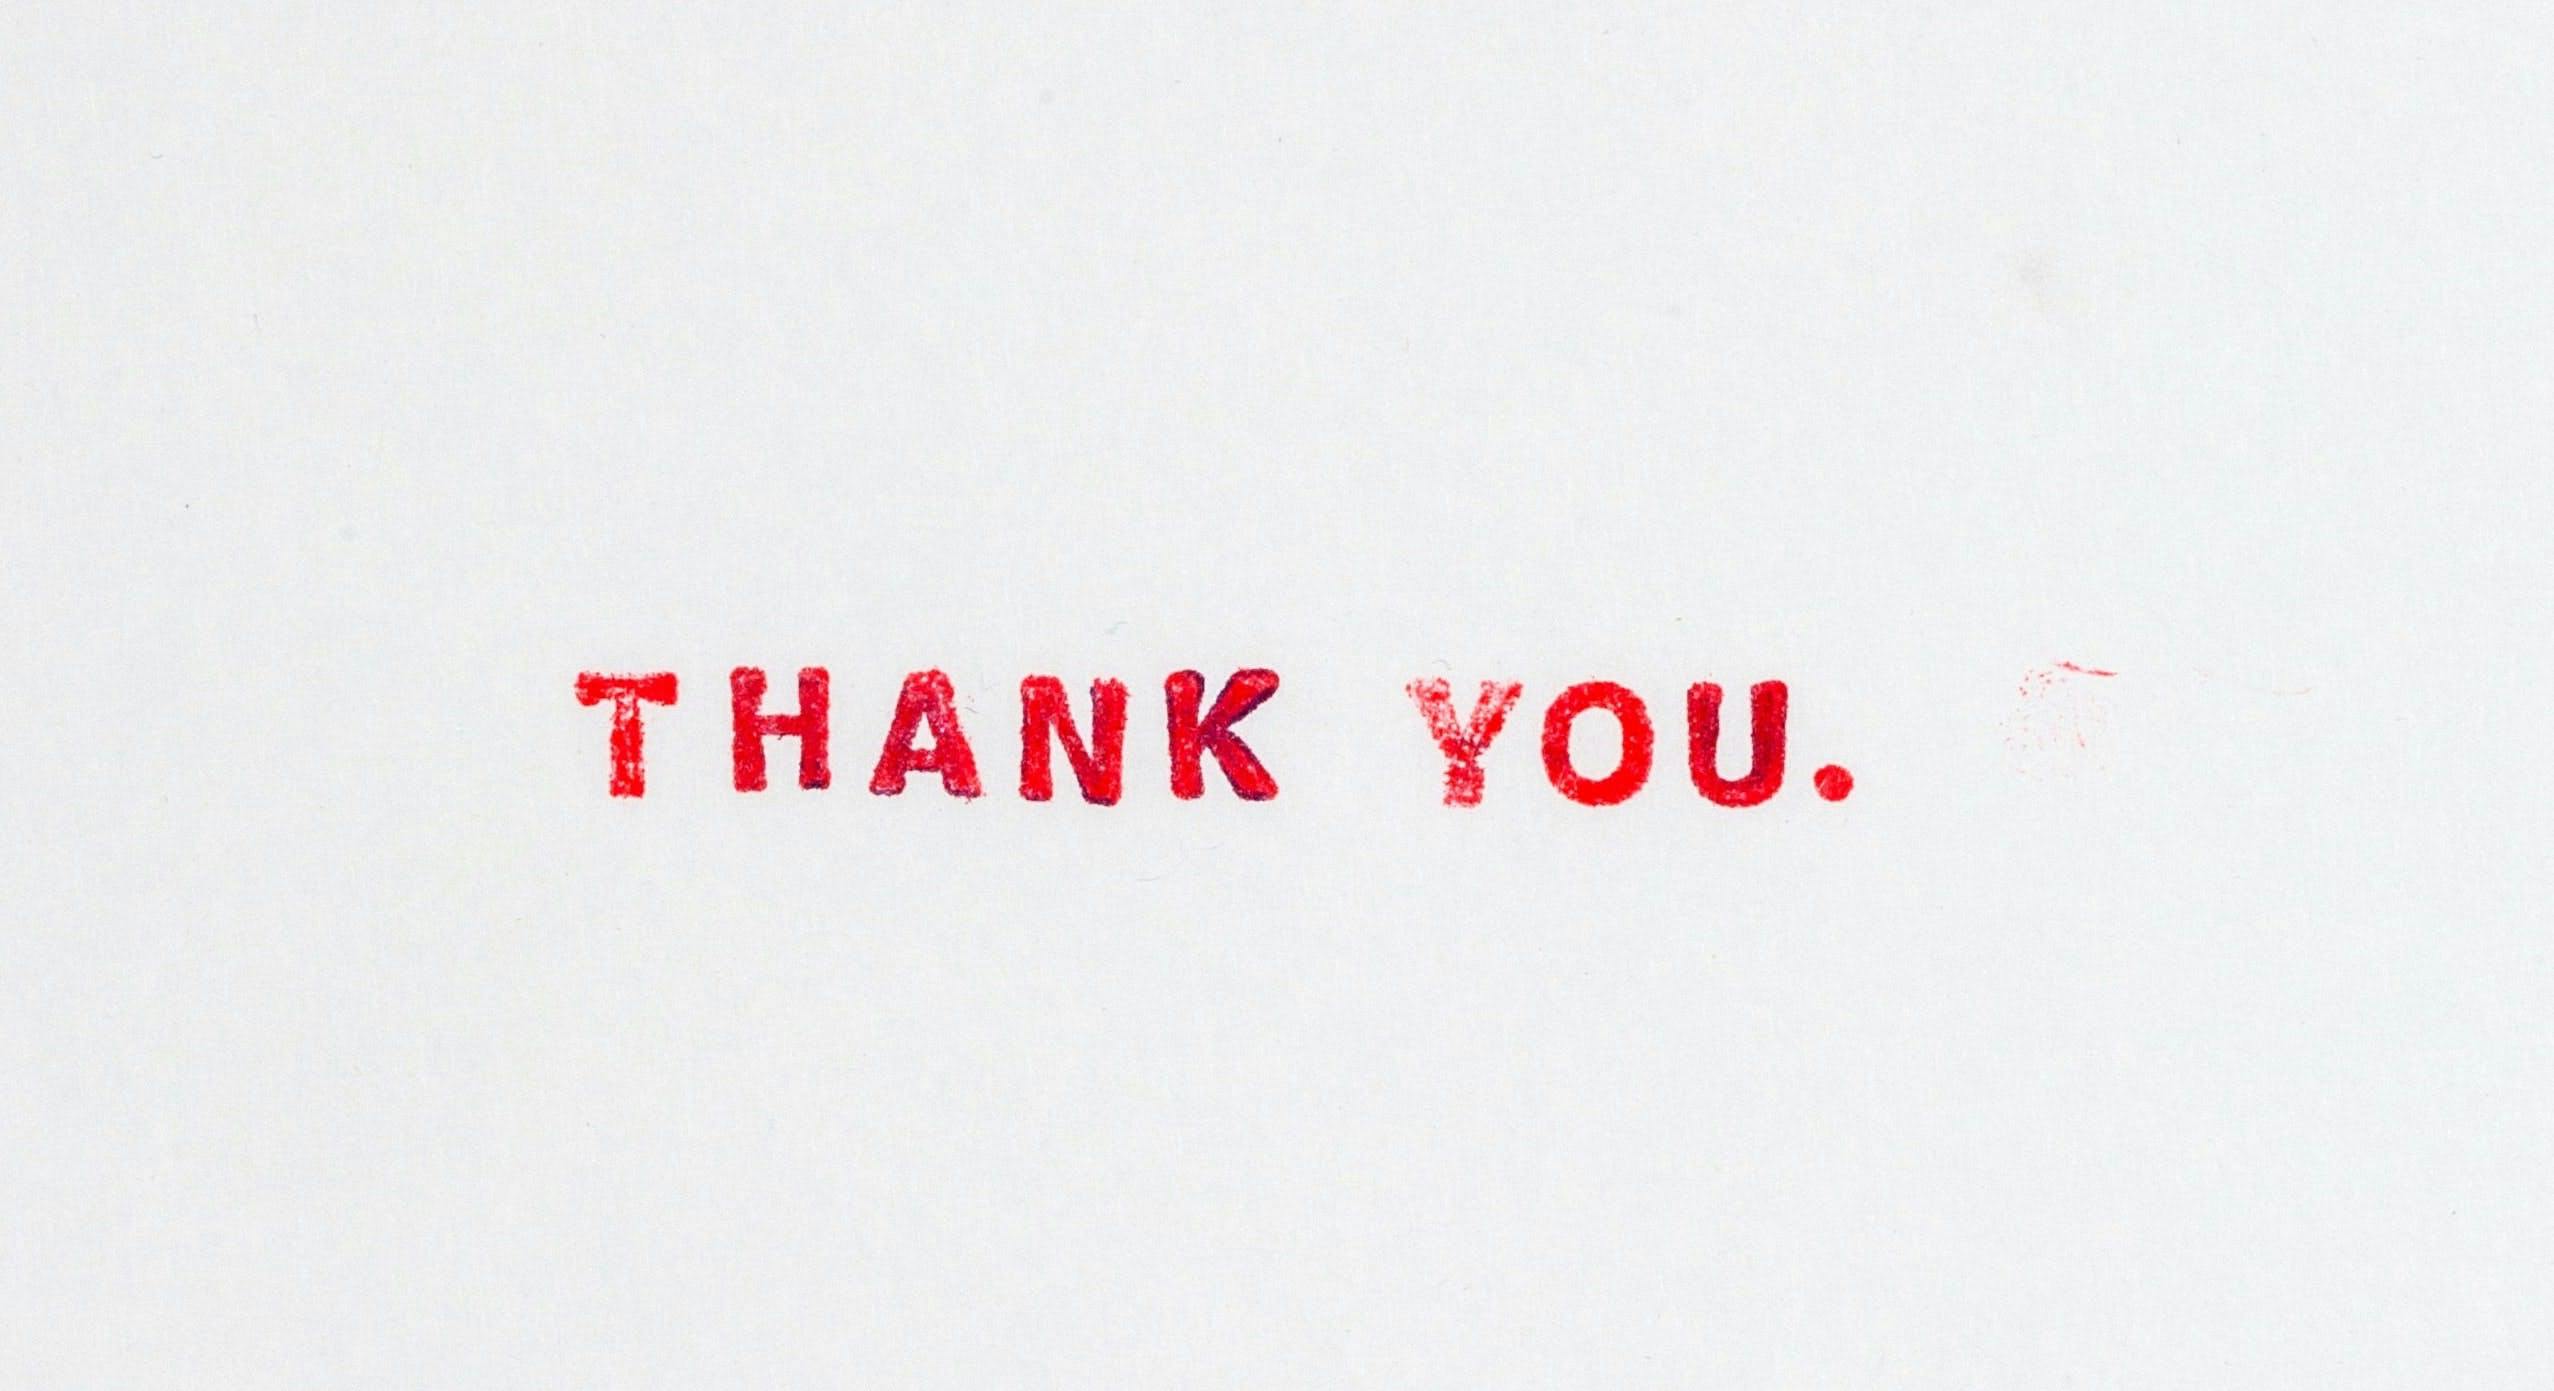 Thank you written in red ink